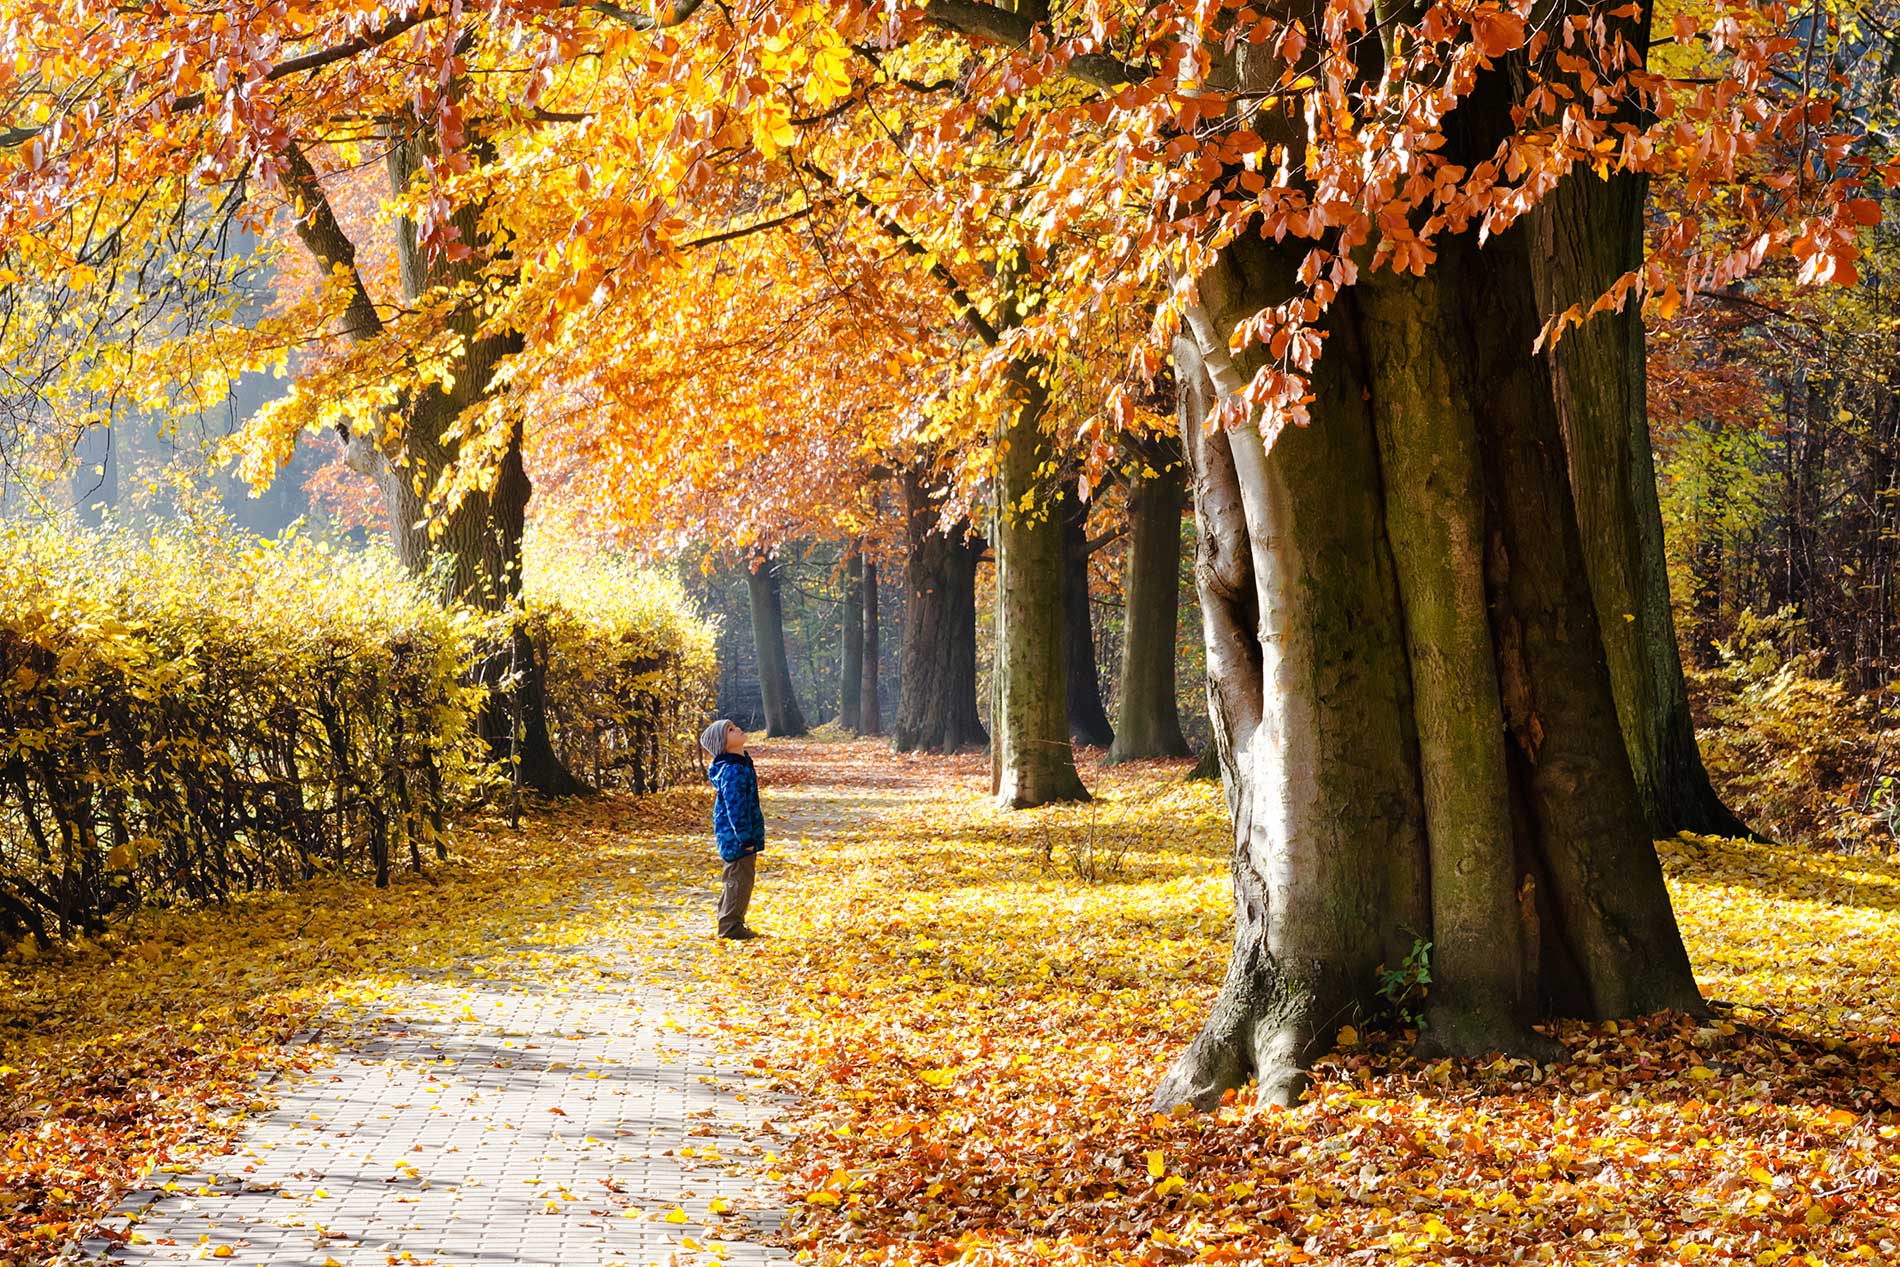 prepare-for-winter-by-shedding-leaves